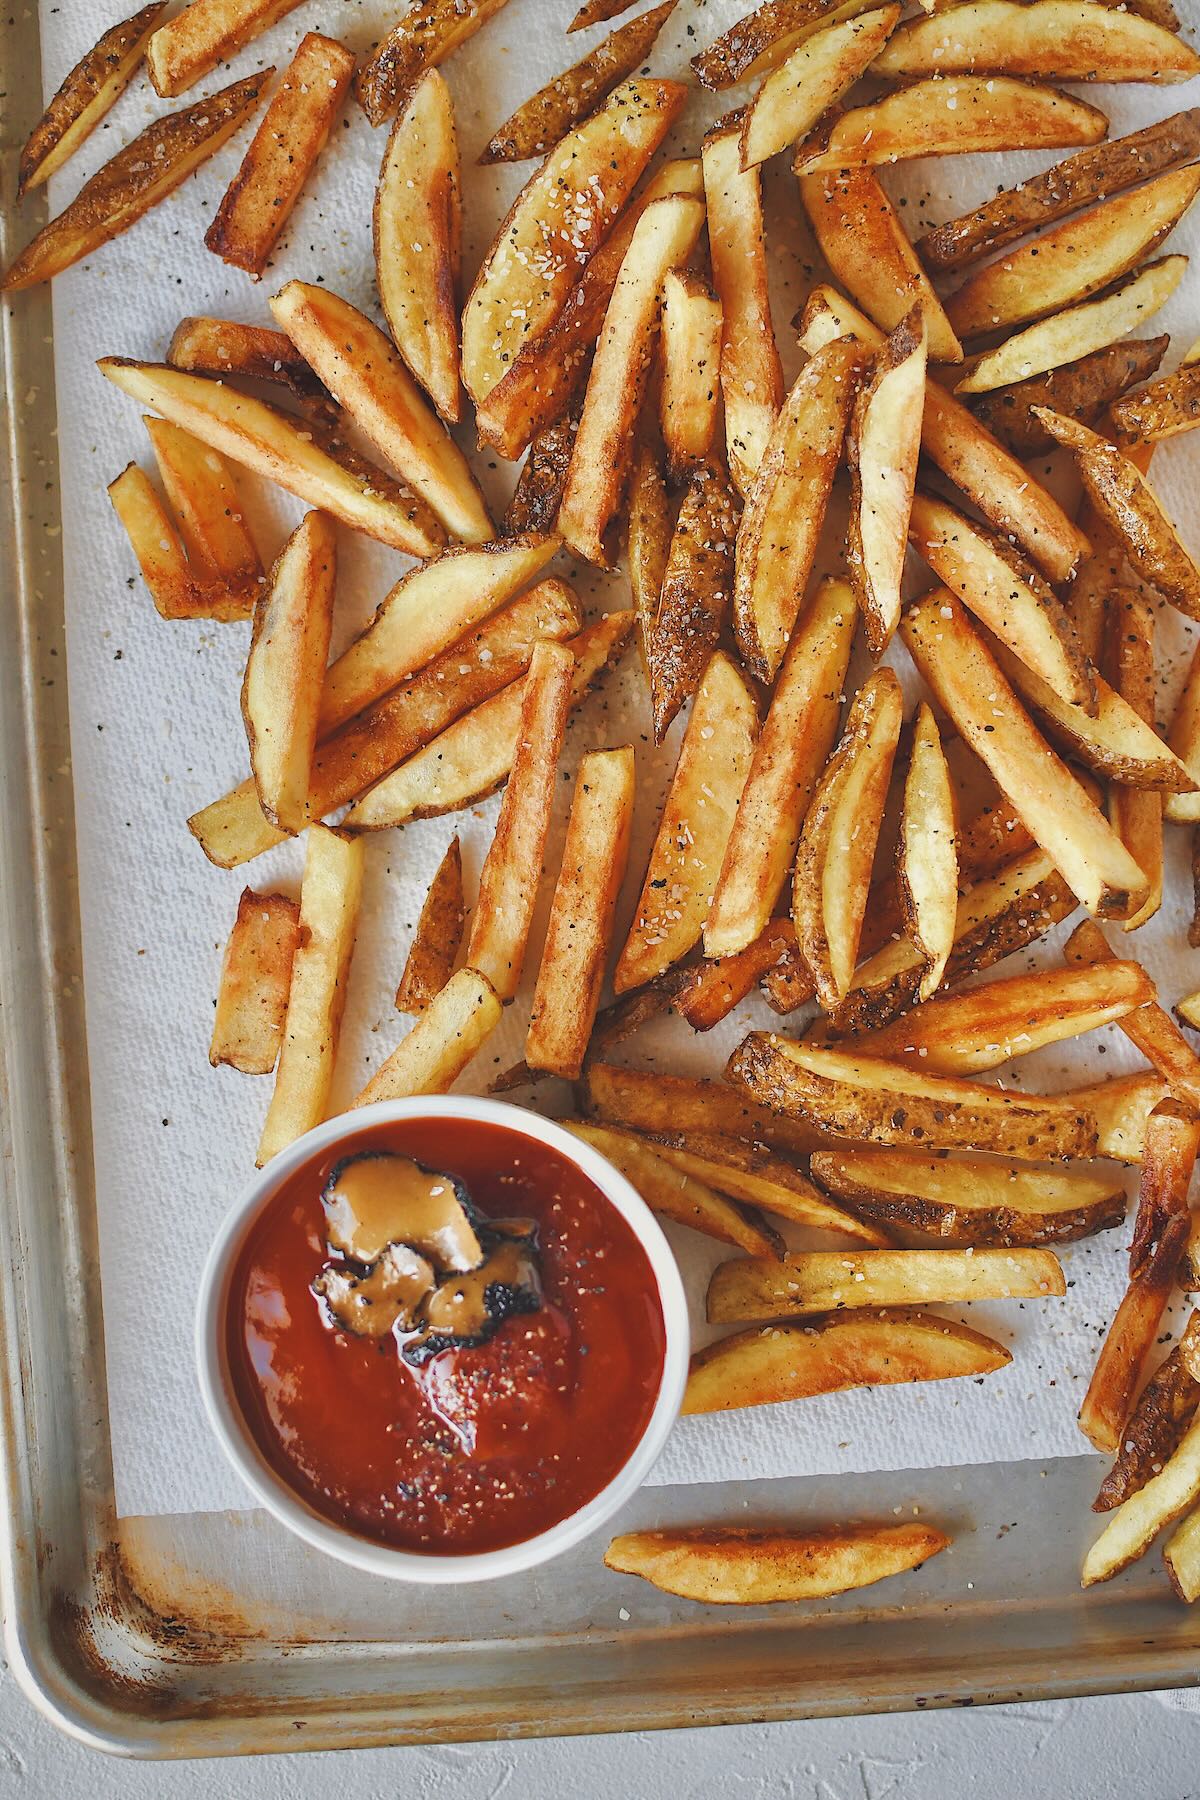 Frites, or french fries just out of the deep fryer, after the second cooking, cooked to a golden brown.